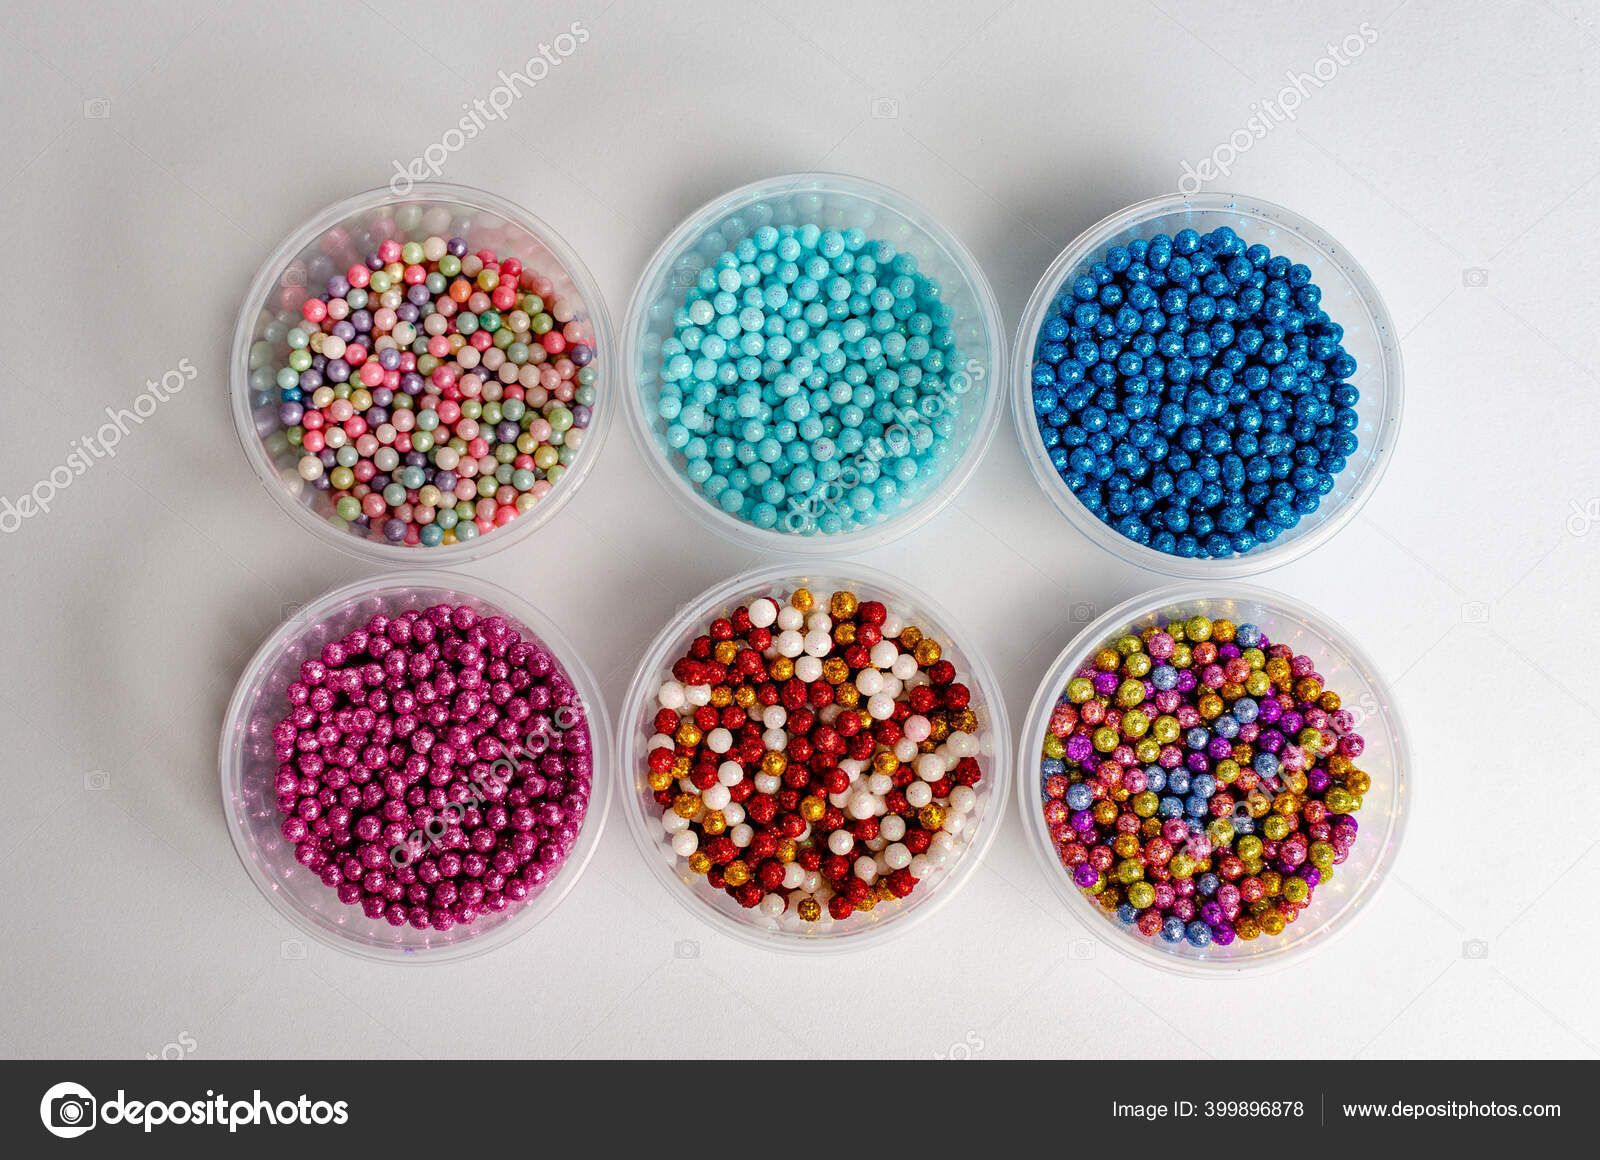 Edible Pearls Grains Dragees Very Colorful Decorate Cakes Desserts Stock  Photo by ©sandorfotografia 399896878